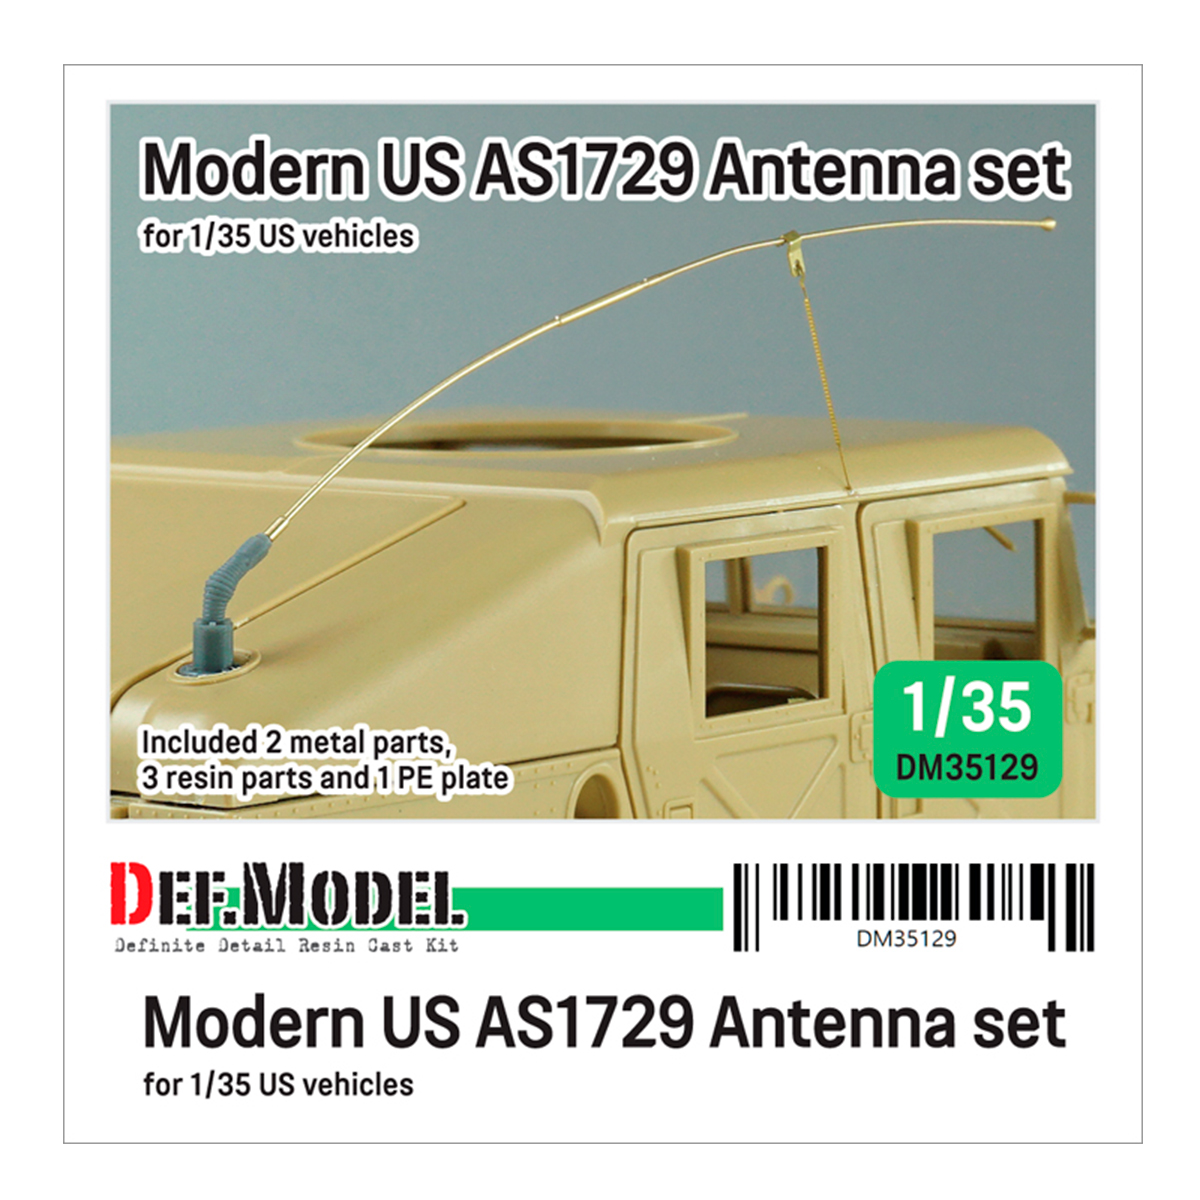 Modern US AS1729 Antenna set (for 1/35 US vehicles)